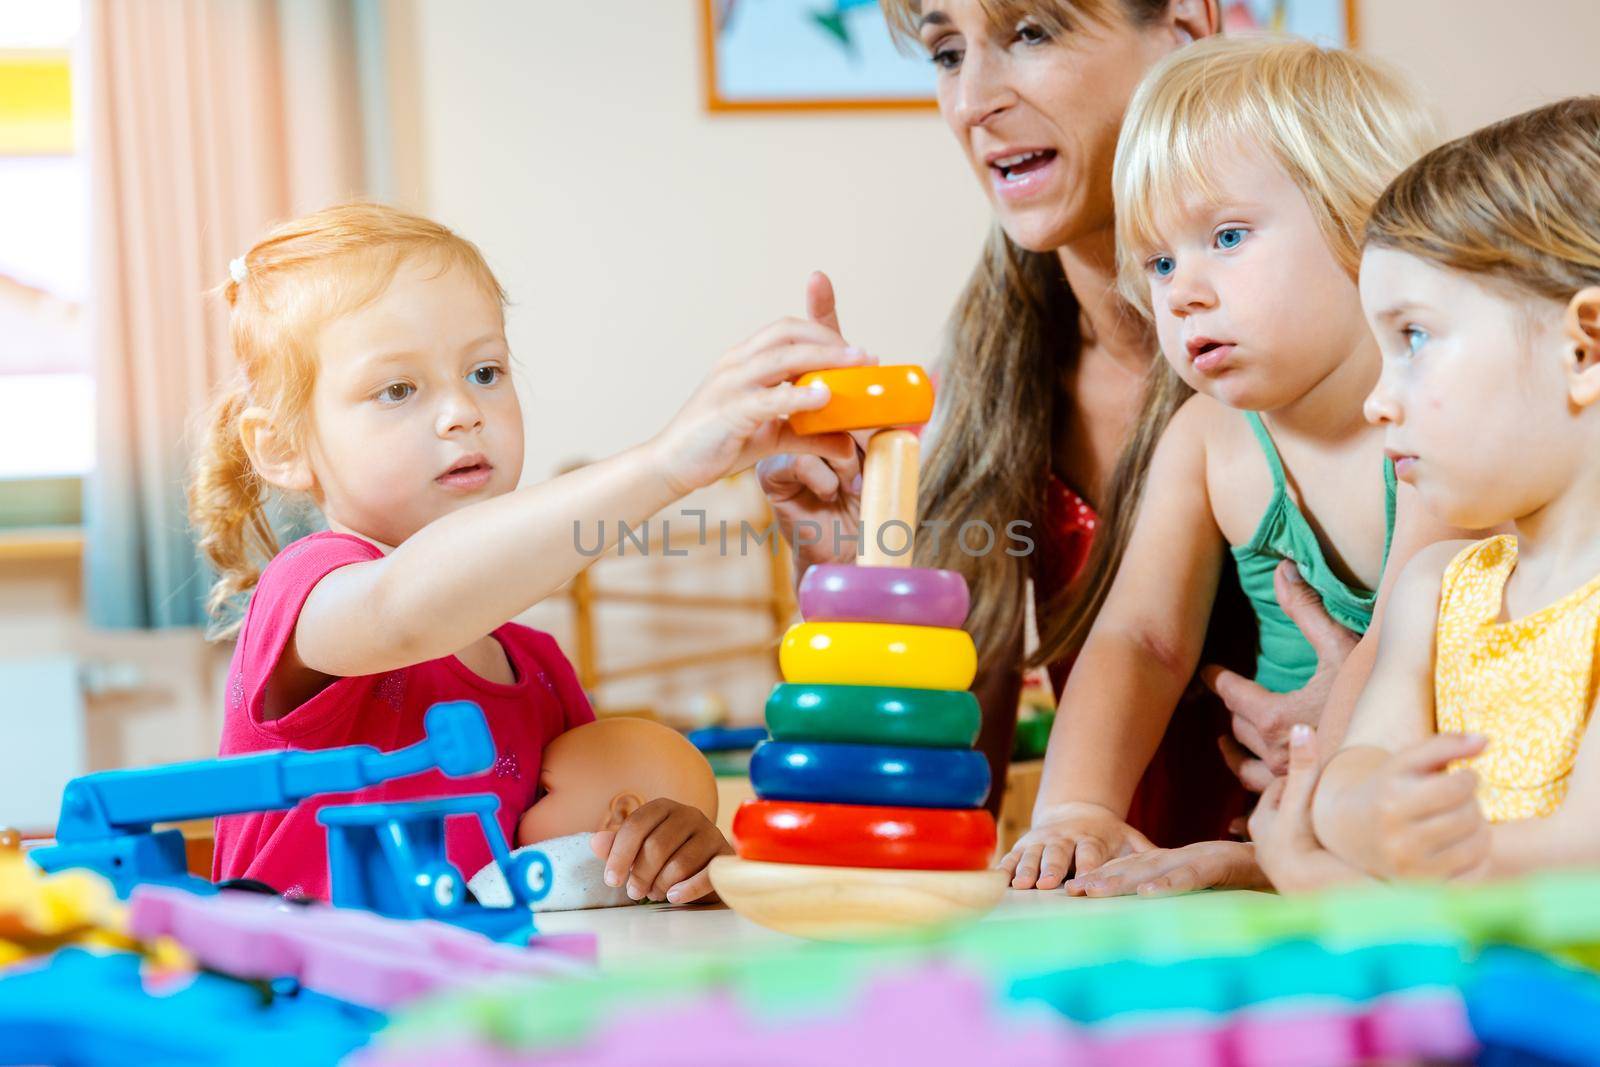 Children in nursery school learning and playing games